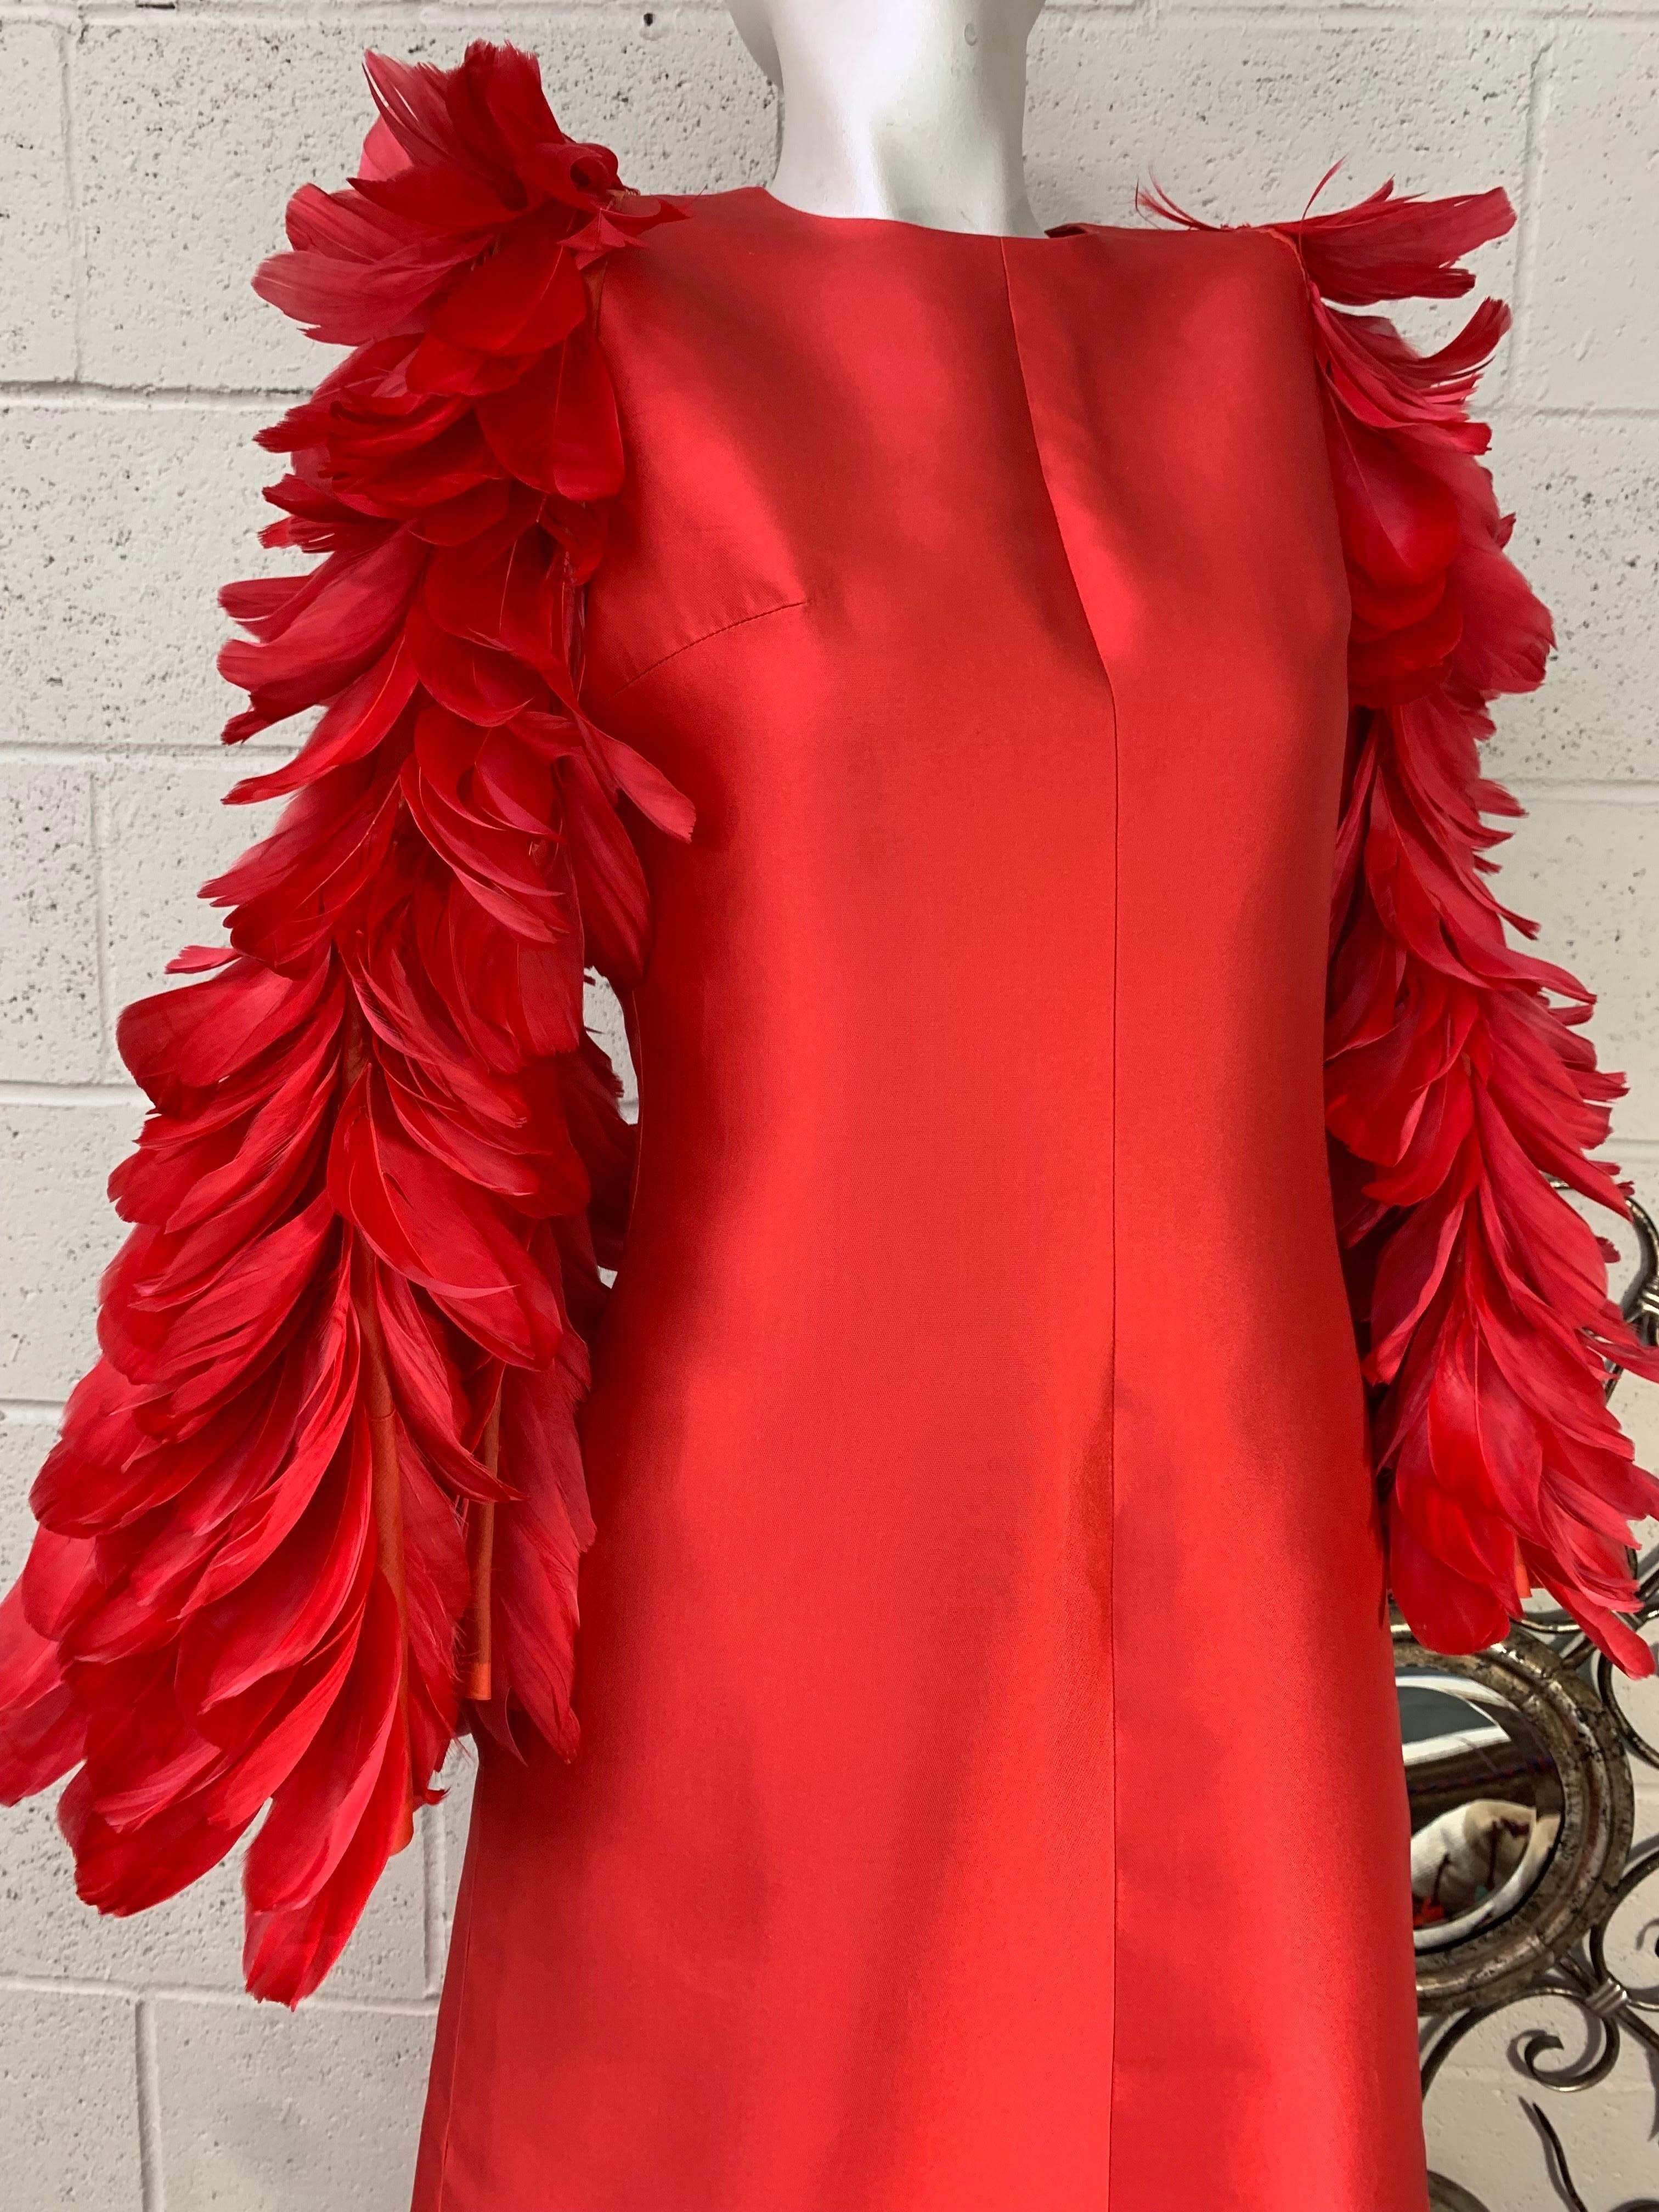 Women's 1960 Joui Schiesser Haute Couture Red Silk Gazar Gown w Feathered Bell Sleeves For Sale